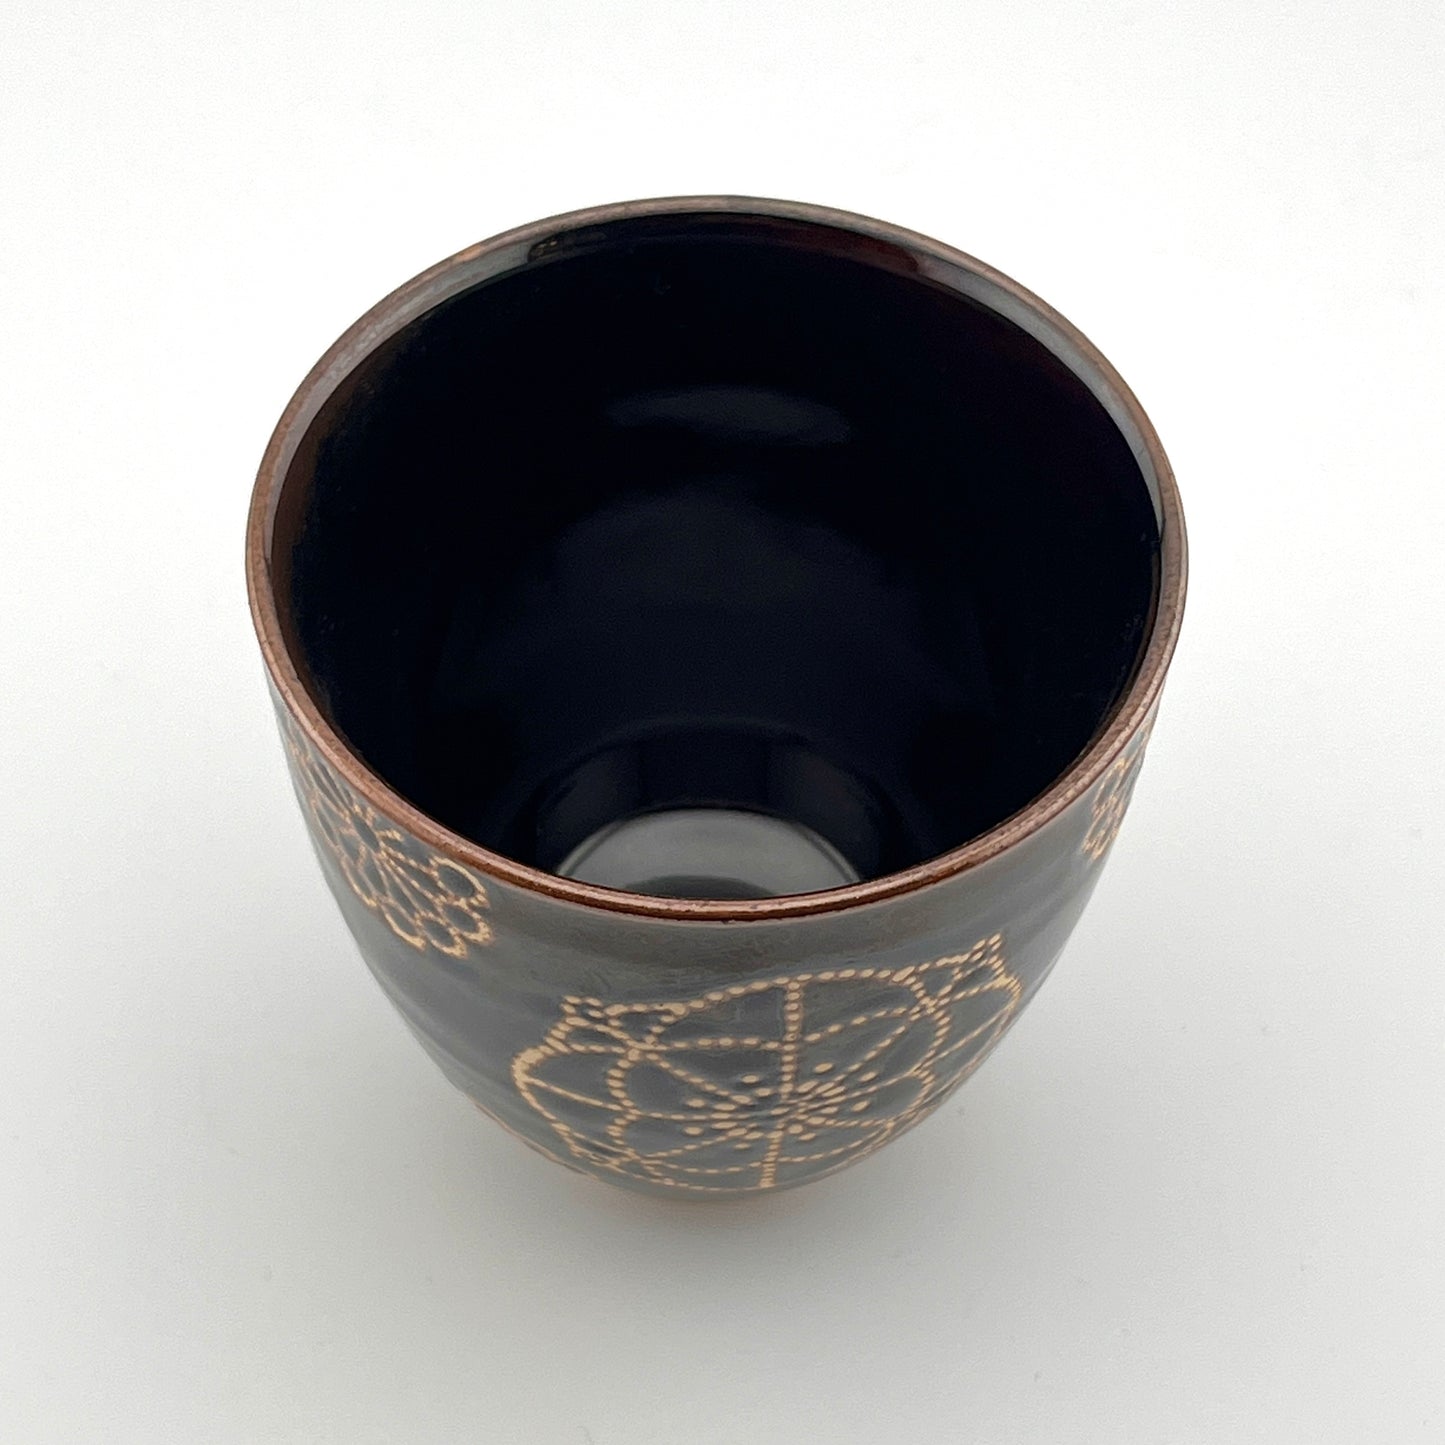 [Hasami Ware] [Aizome Kiln] [Stitch] [Cup] Hasami Ware Teacup Yunomi Fashionable Adult Colorful Cute